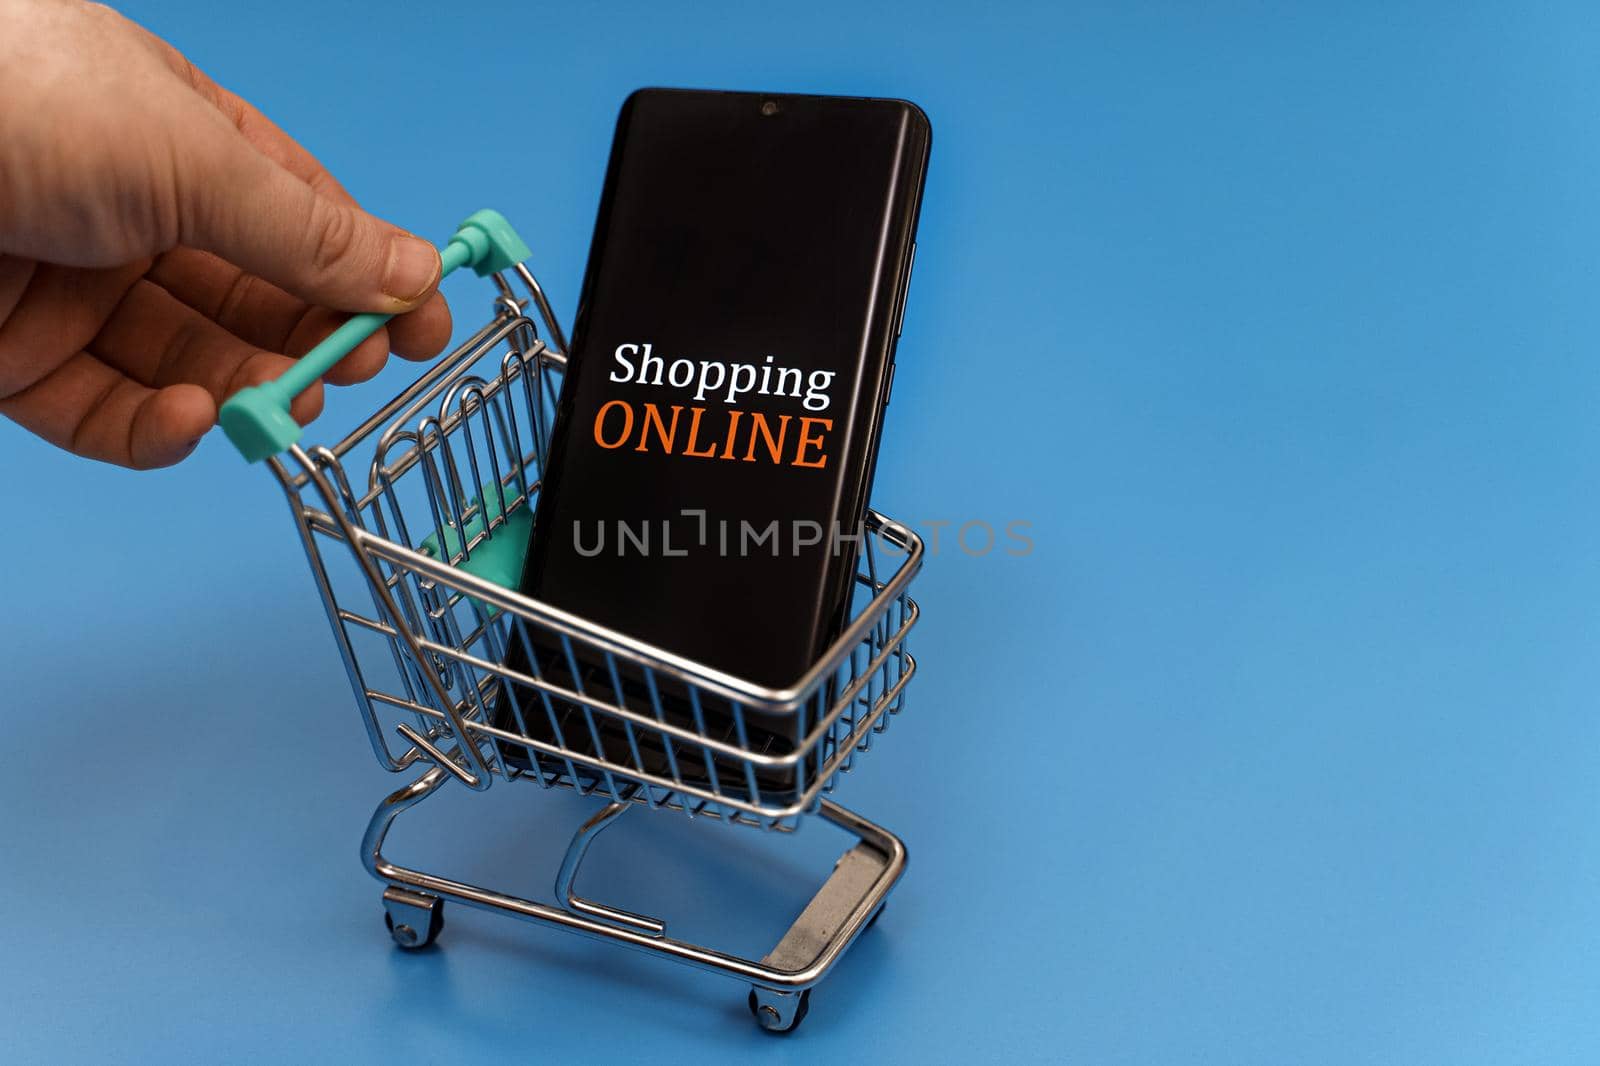 Shopping cart with smartphone on blue background. Online shopping concept.